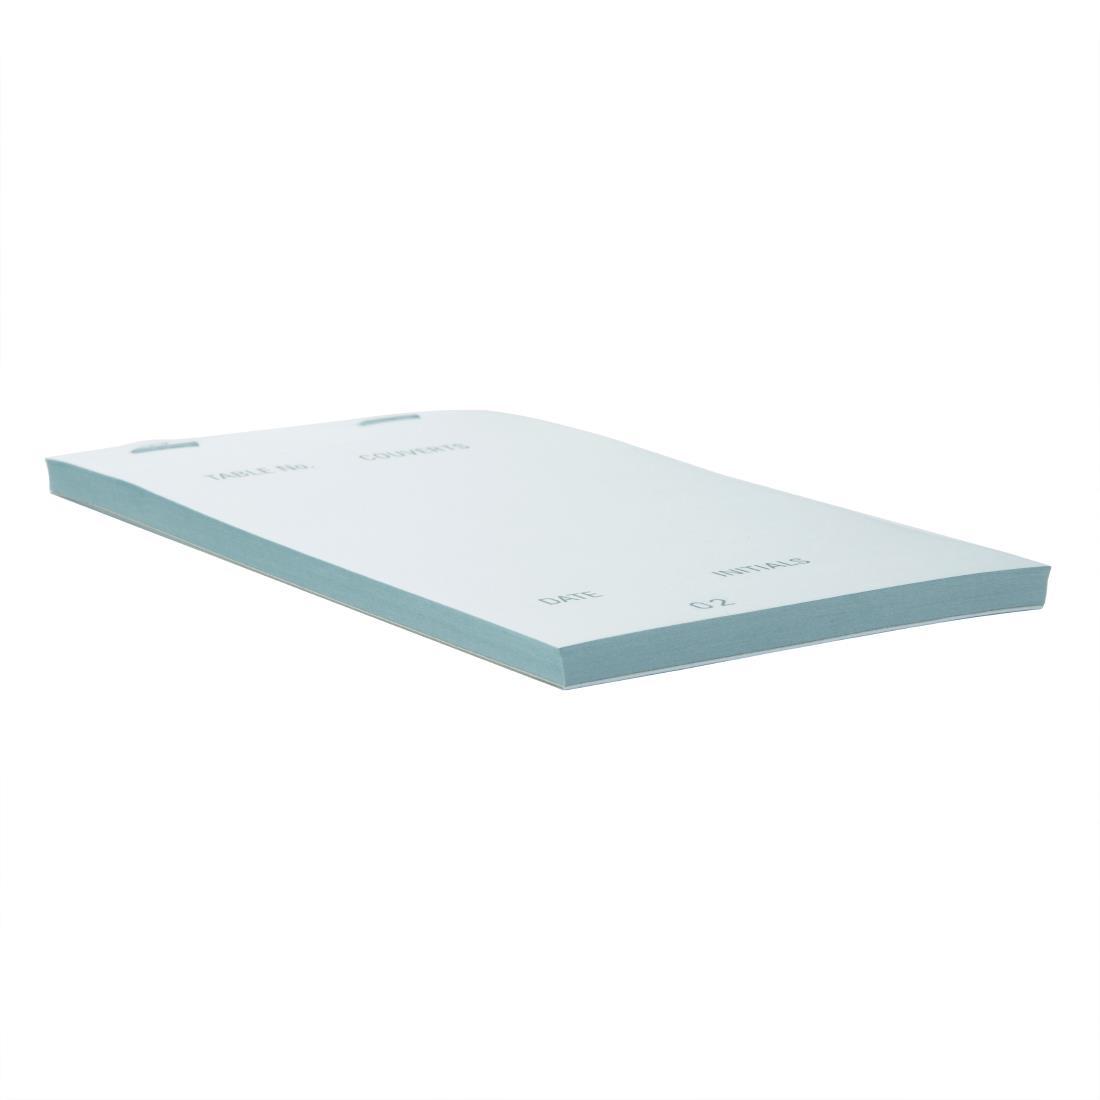 Carbonless Waiter Pad Duplicate Large (Pack of 50) - G523  - 2